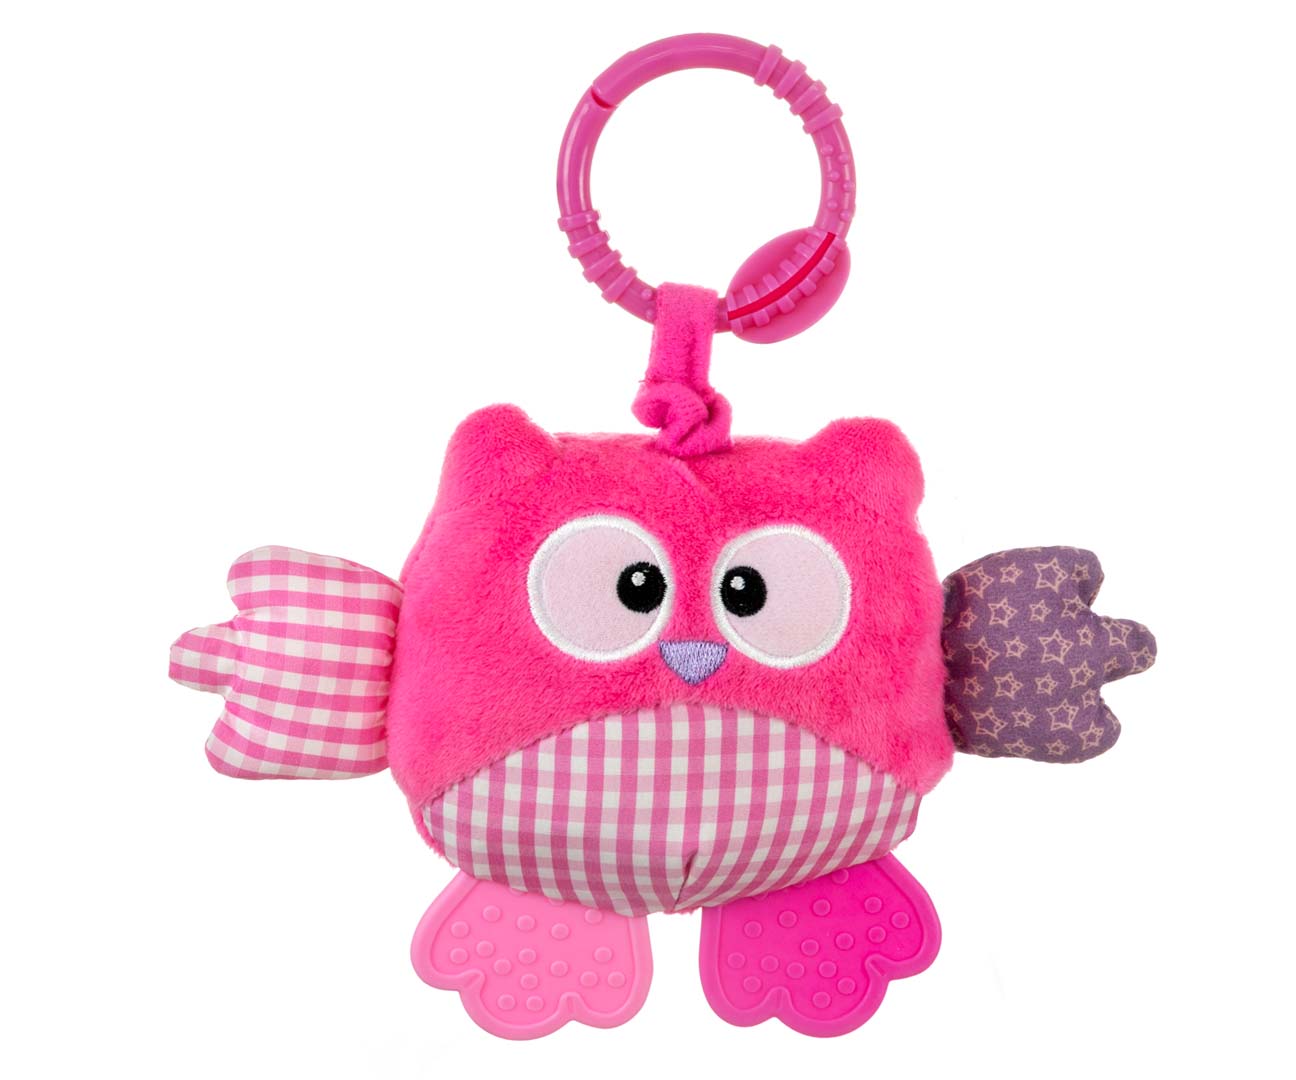 Milly Mally Plush hanging toy - Cutie owl - 2881 ..